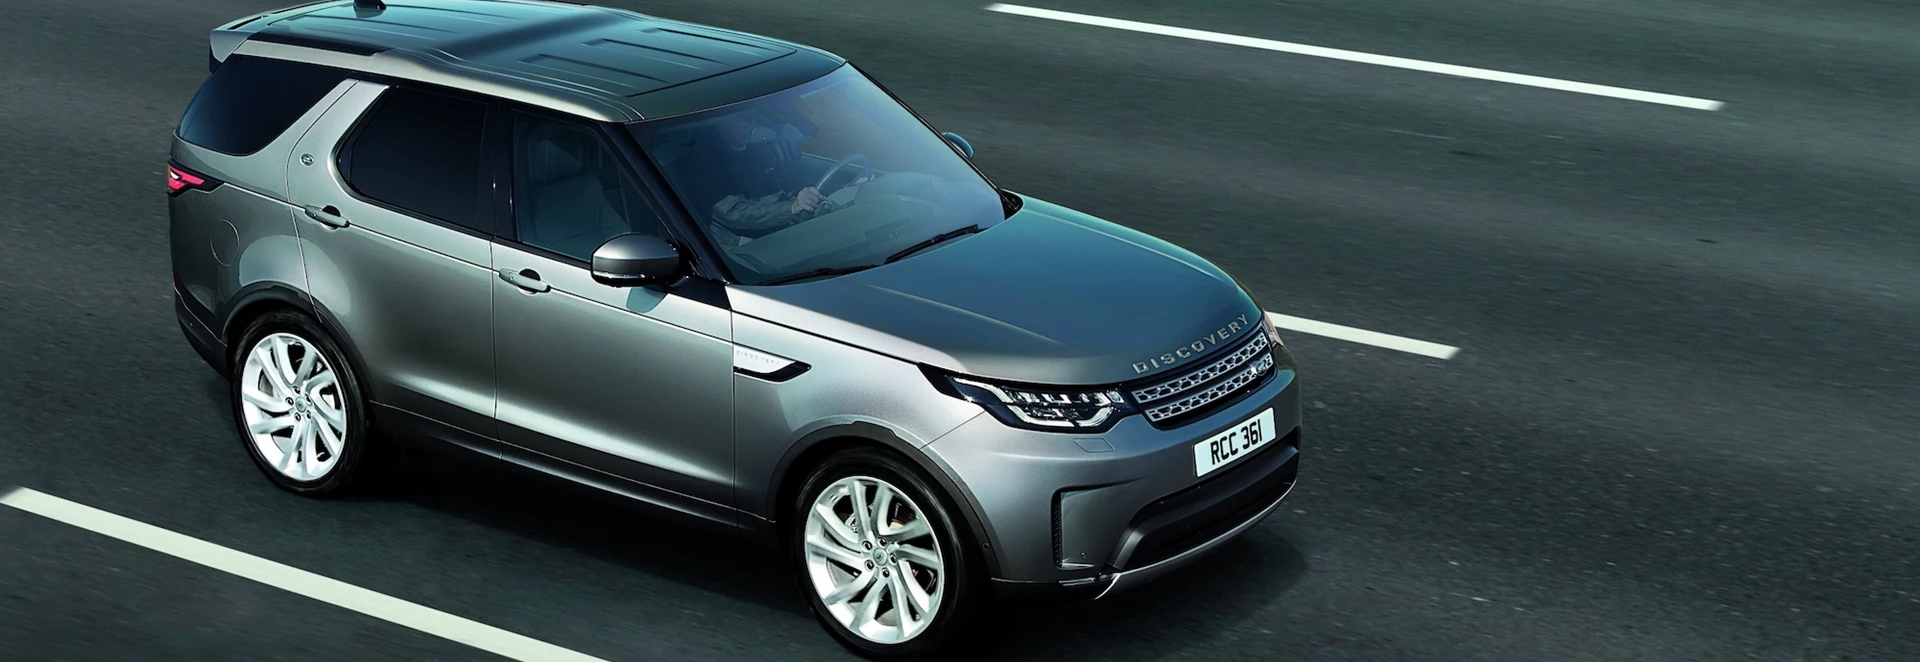 Land Rover reveals Commercial version of the Discovery 